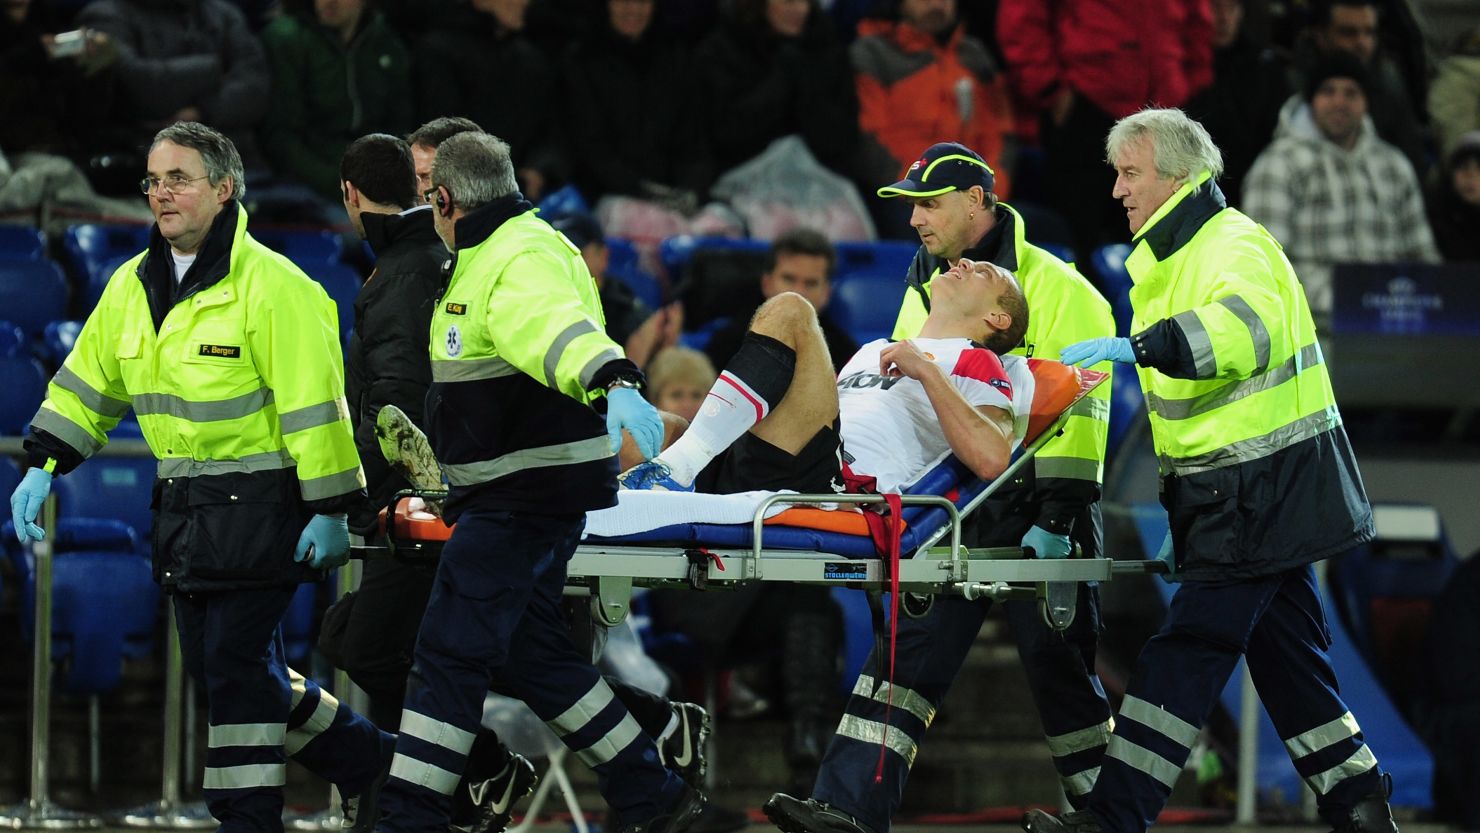 Manchester United's Nemanja Vidic injured knee ligaments during Wednesday's defeat to Basel.